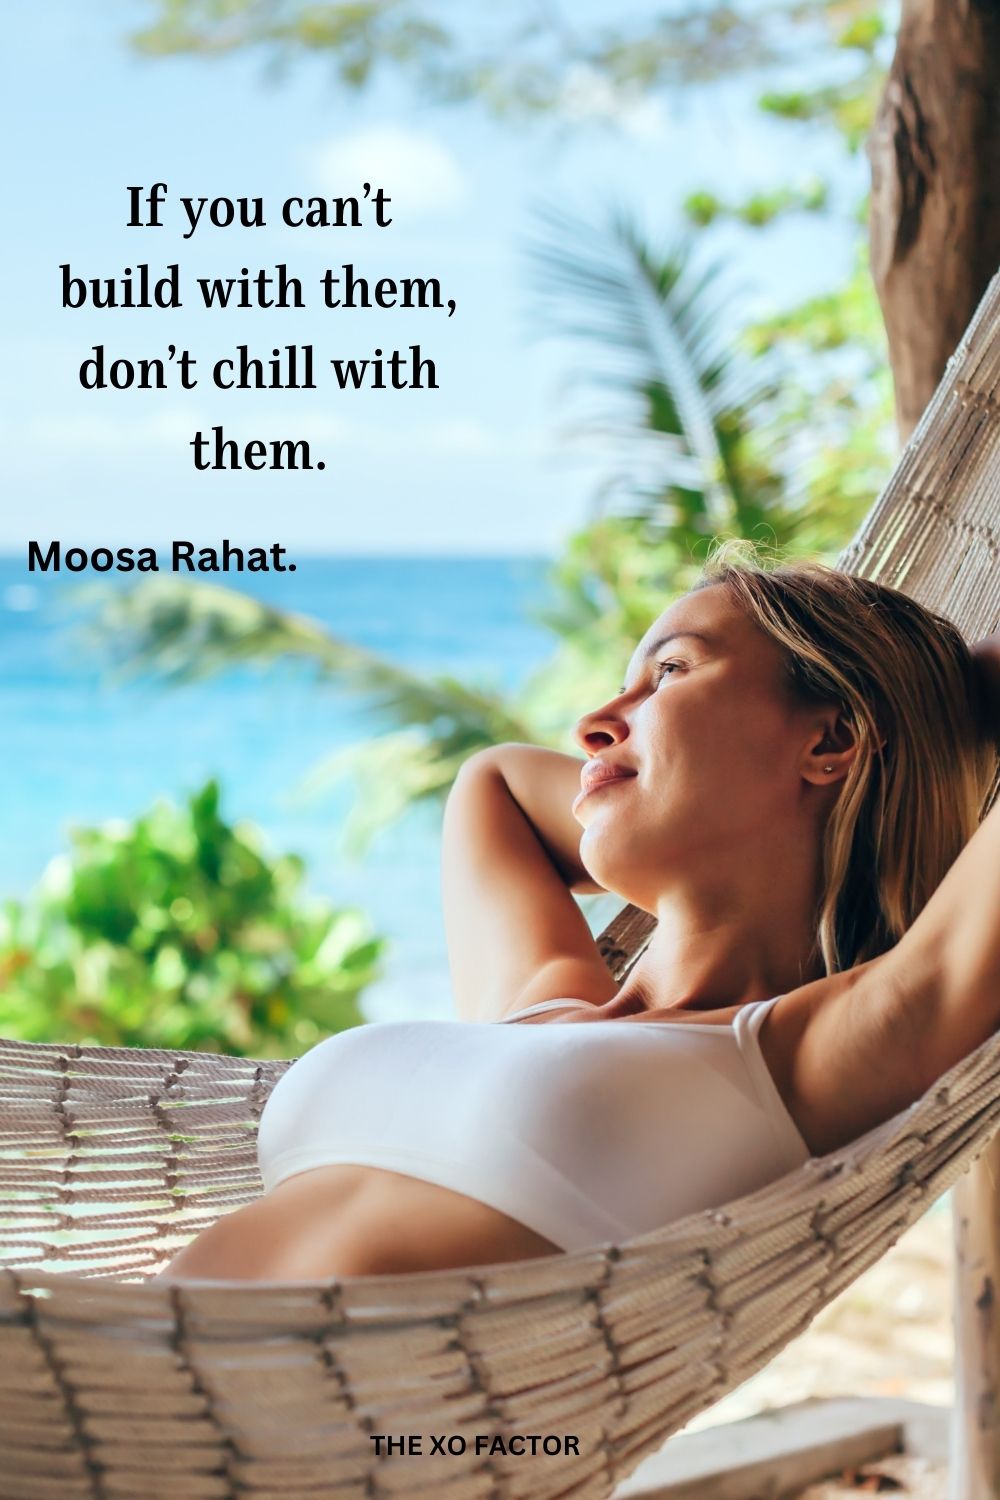 If you can’t build with them, don’t chill with them.
Moosa Rahat.